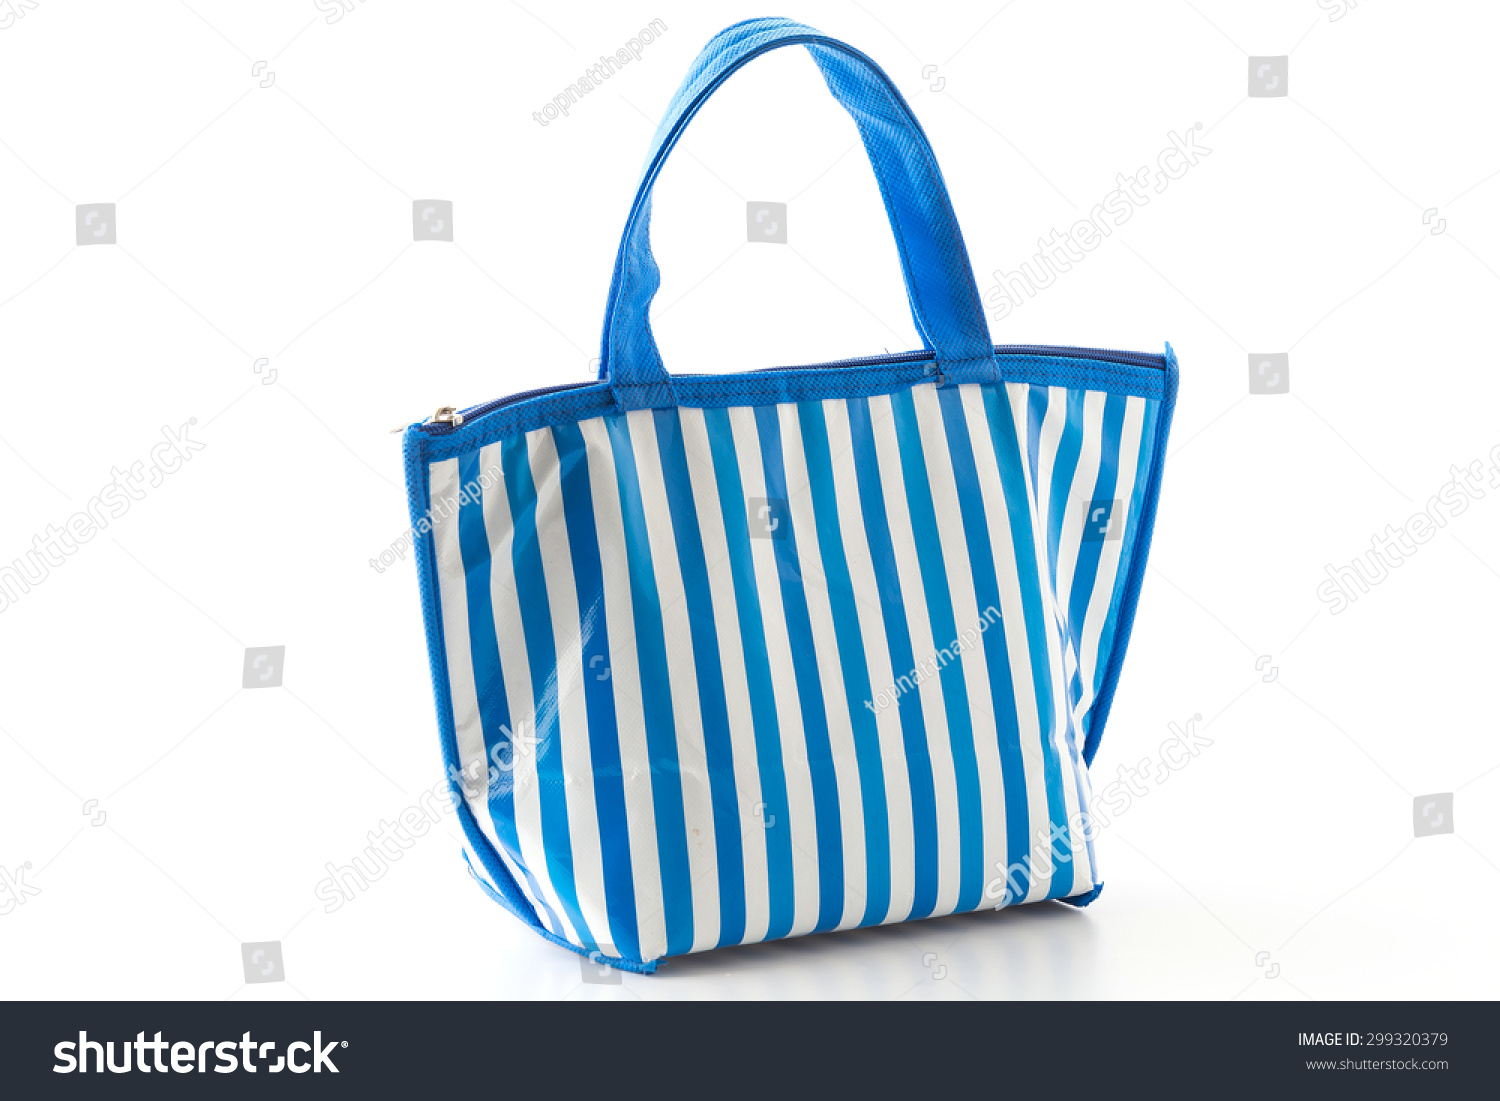 Bag Style On White Background Stock Photo 299320379 | Shutterstock